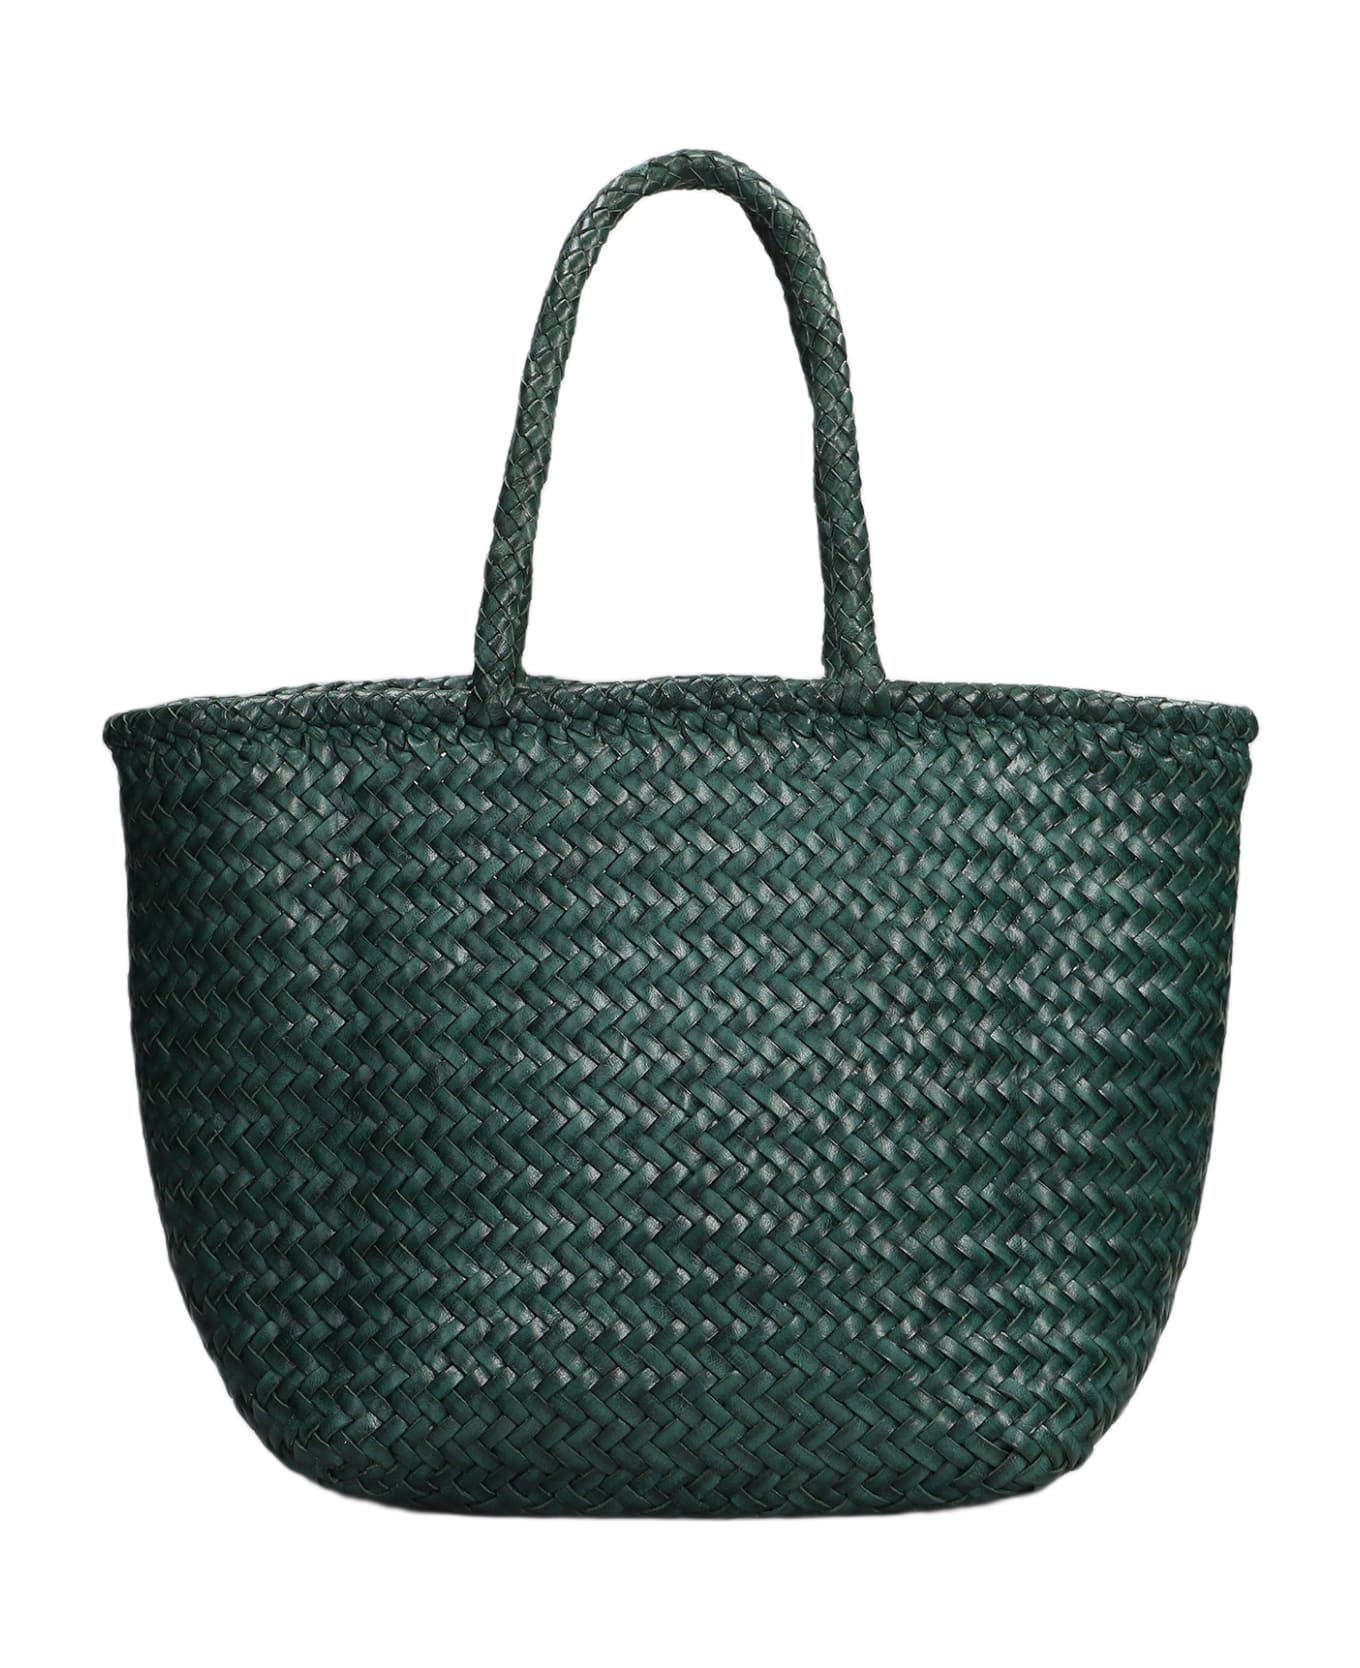 Dragon Diffusion Grace Basket Tote In Green Leather - green